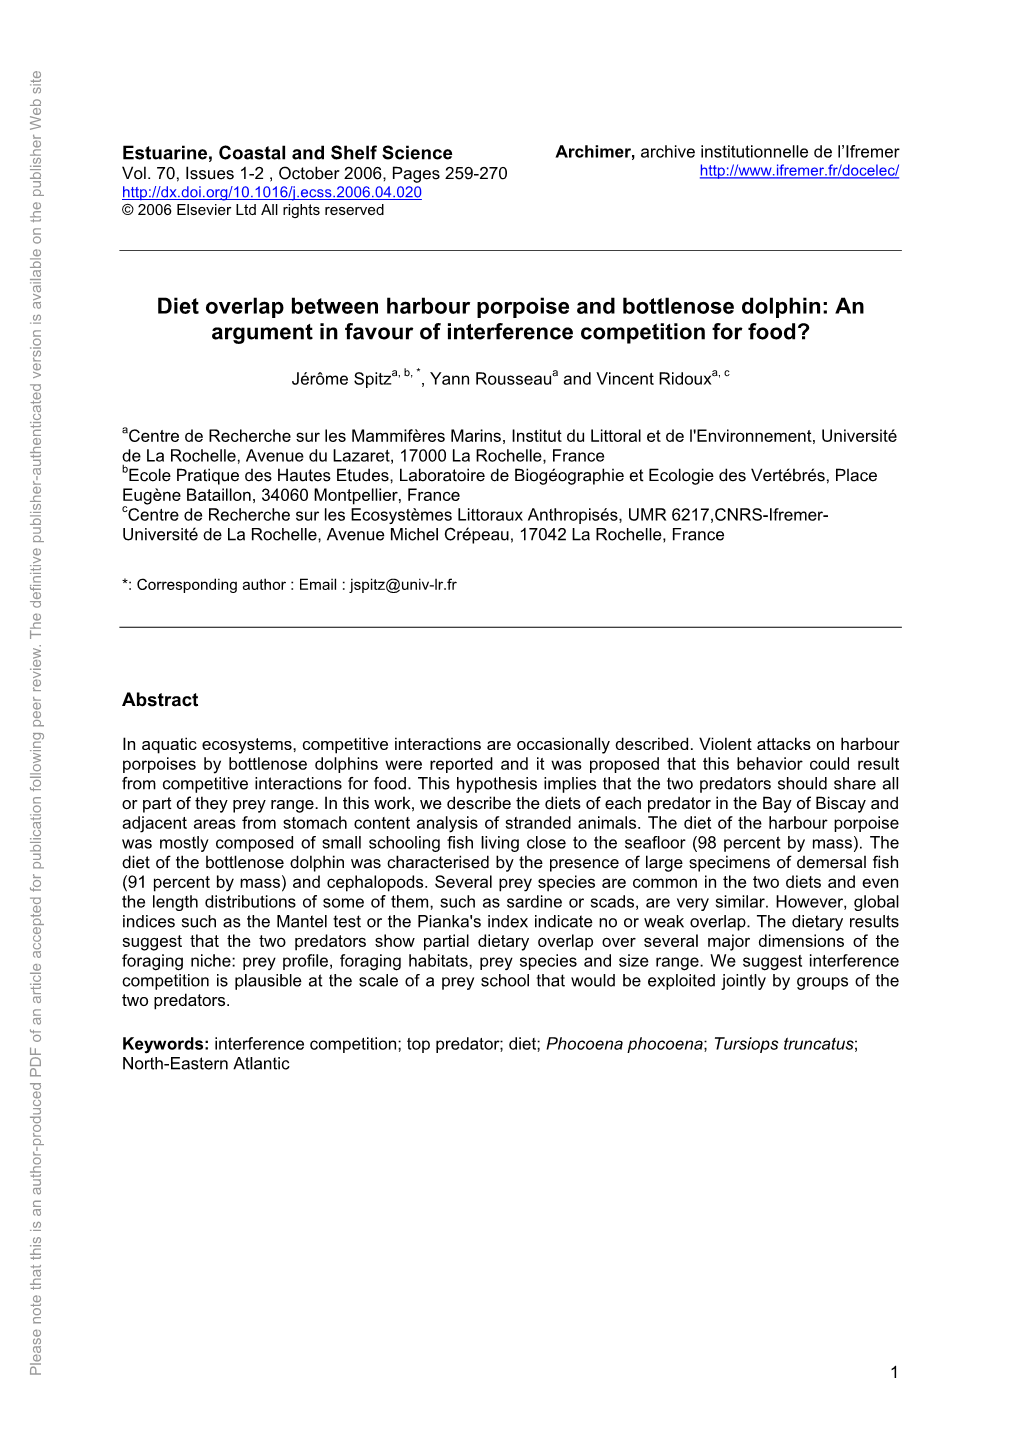 Diet Overlap Between Harbour Porpoise and Bottlenose Dolphin: an Argument in Favour of Interference Competition for Food?